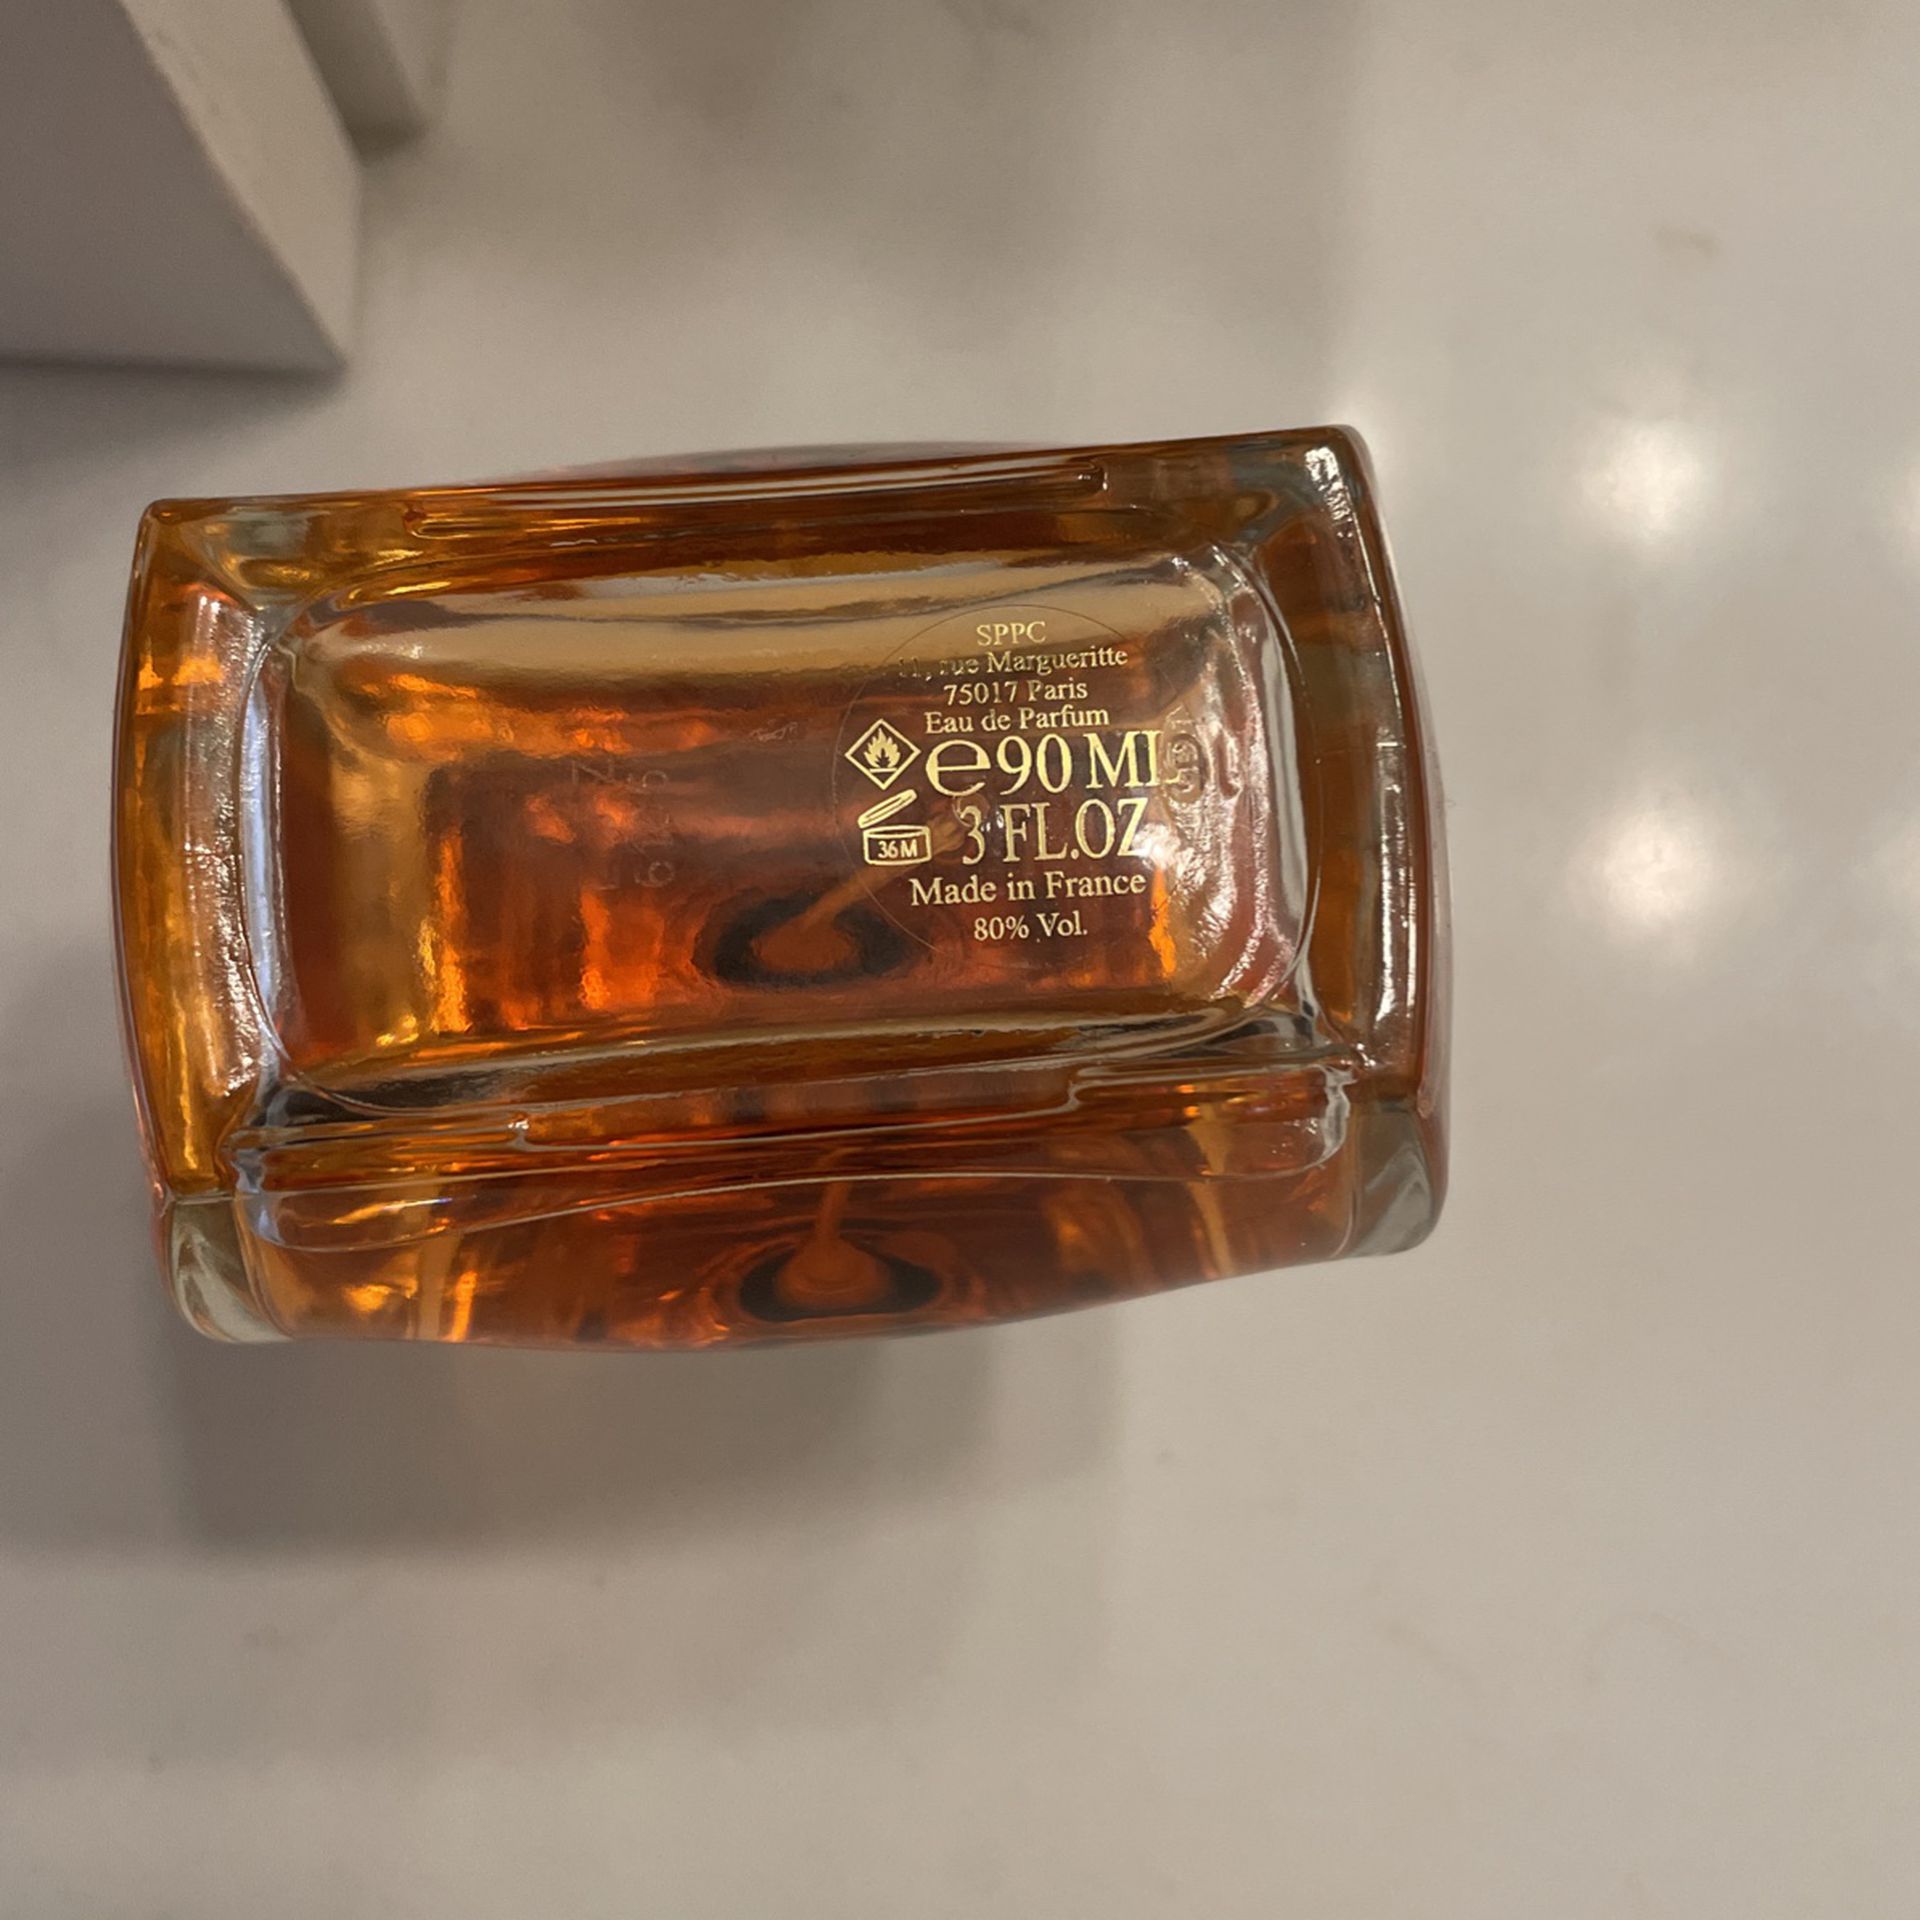 Conviction Perfume 3oz for Sale in Wesley Chapel, FL - OfferUp